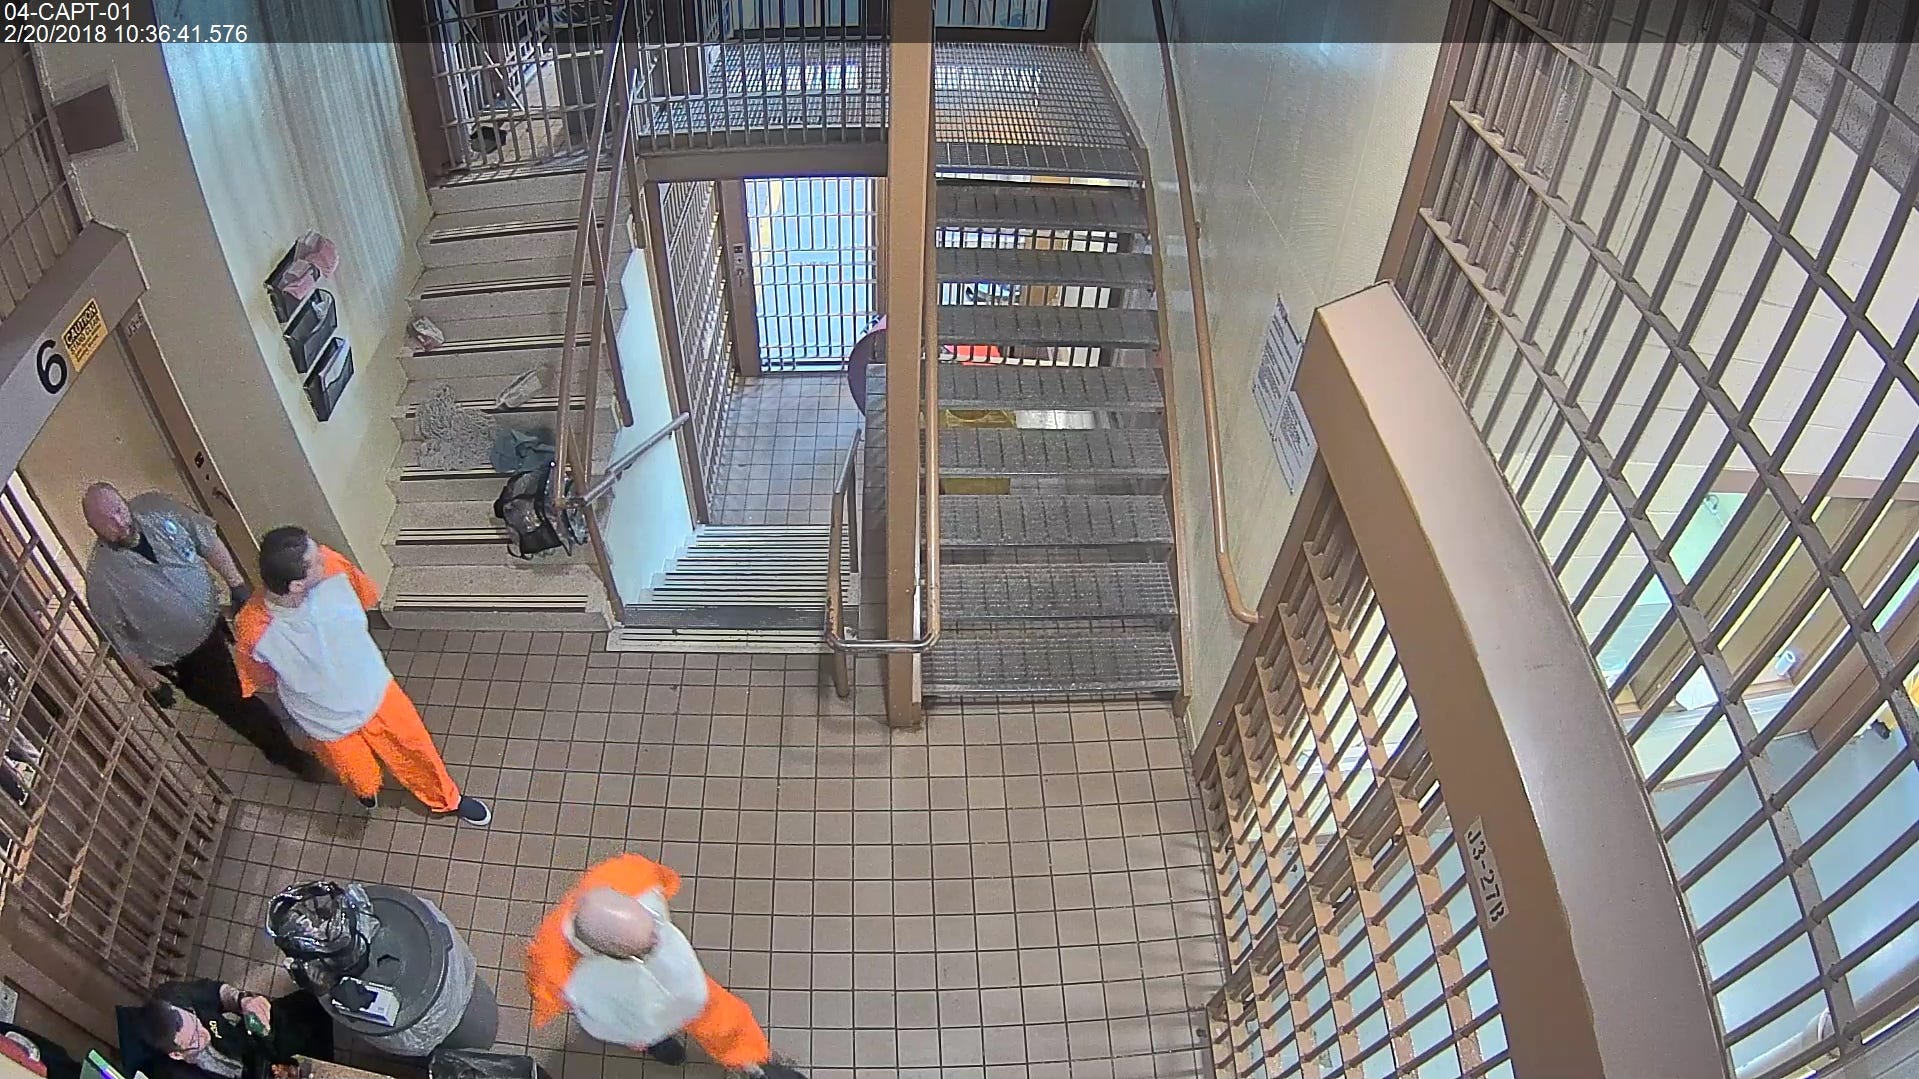 GRAPHIC VIDEO Surveillance video shows inmates attack, stab guard